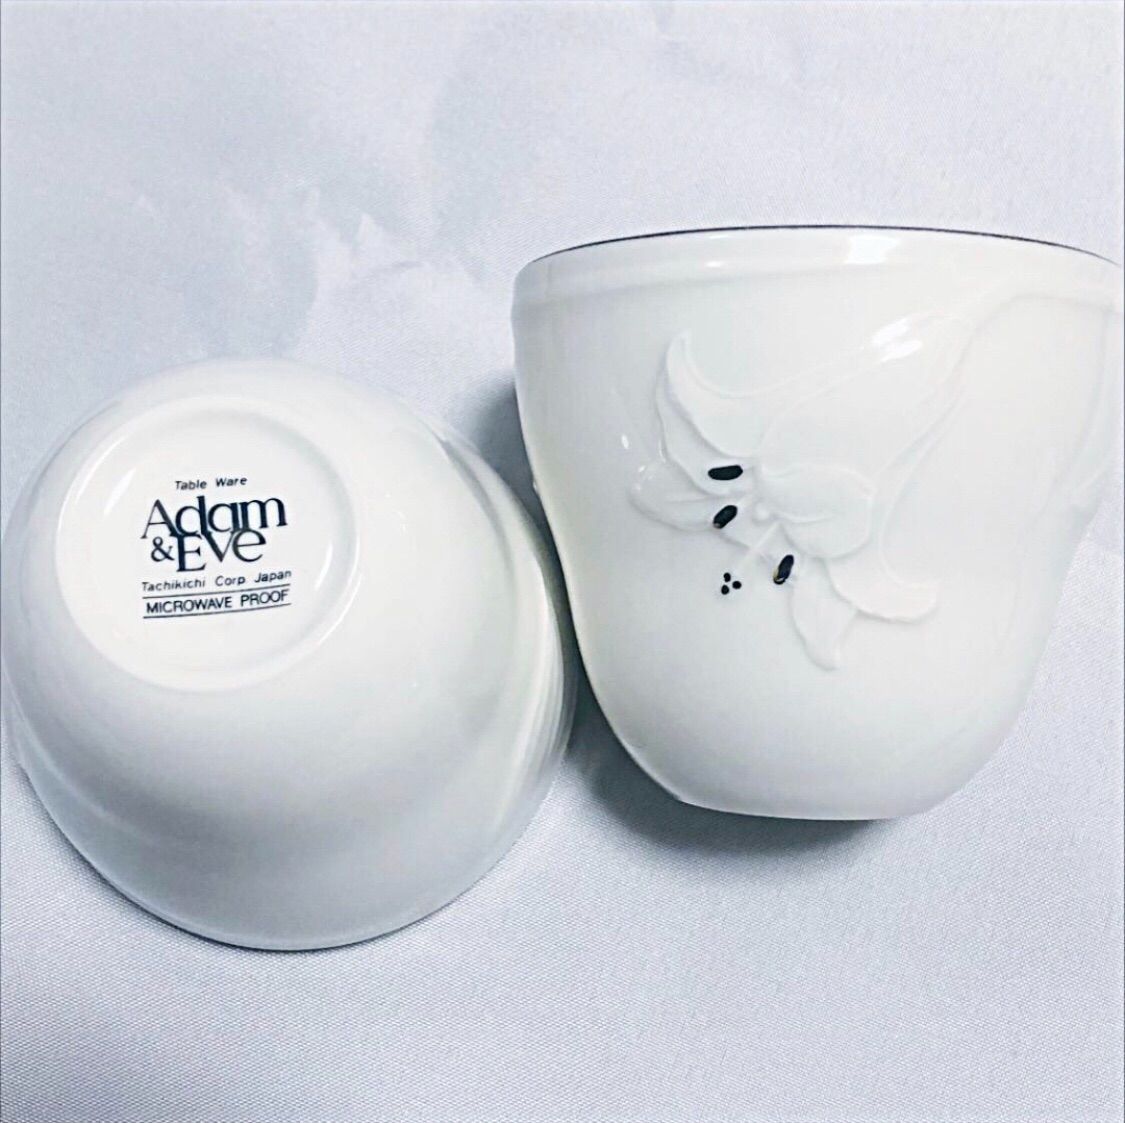 TableWare Adam＆Eve 皿2枚セット♪たち吉 新生活 - 食器